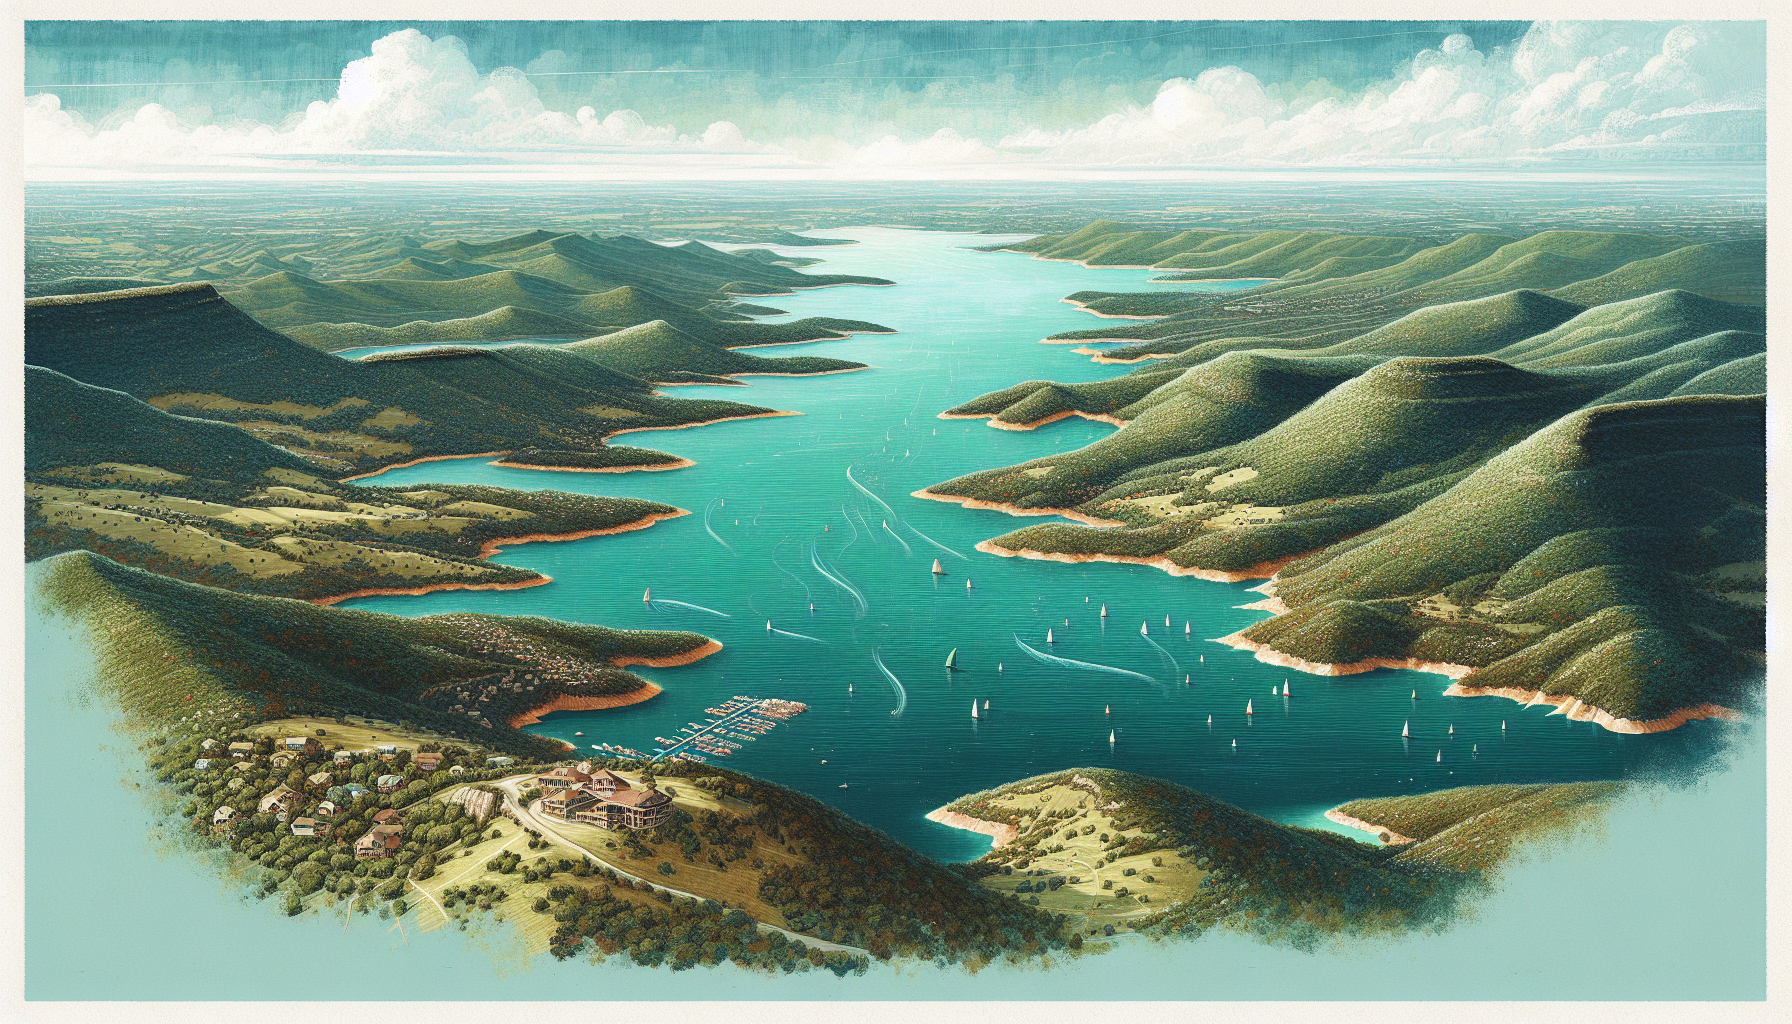 Aerial view of Lake Travis surrounded by Texas hill country, showcasing its scenic beauty